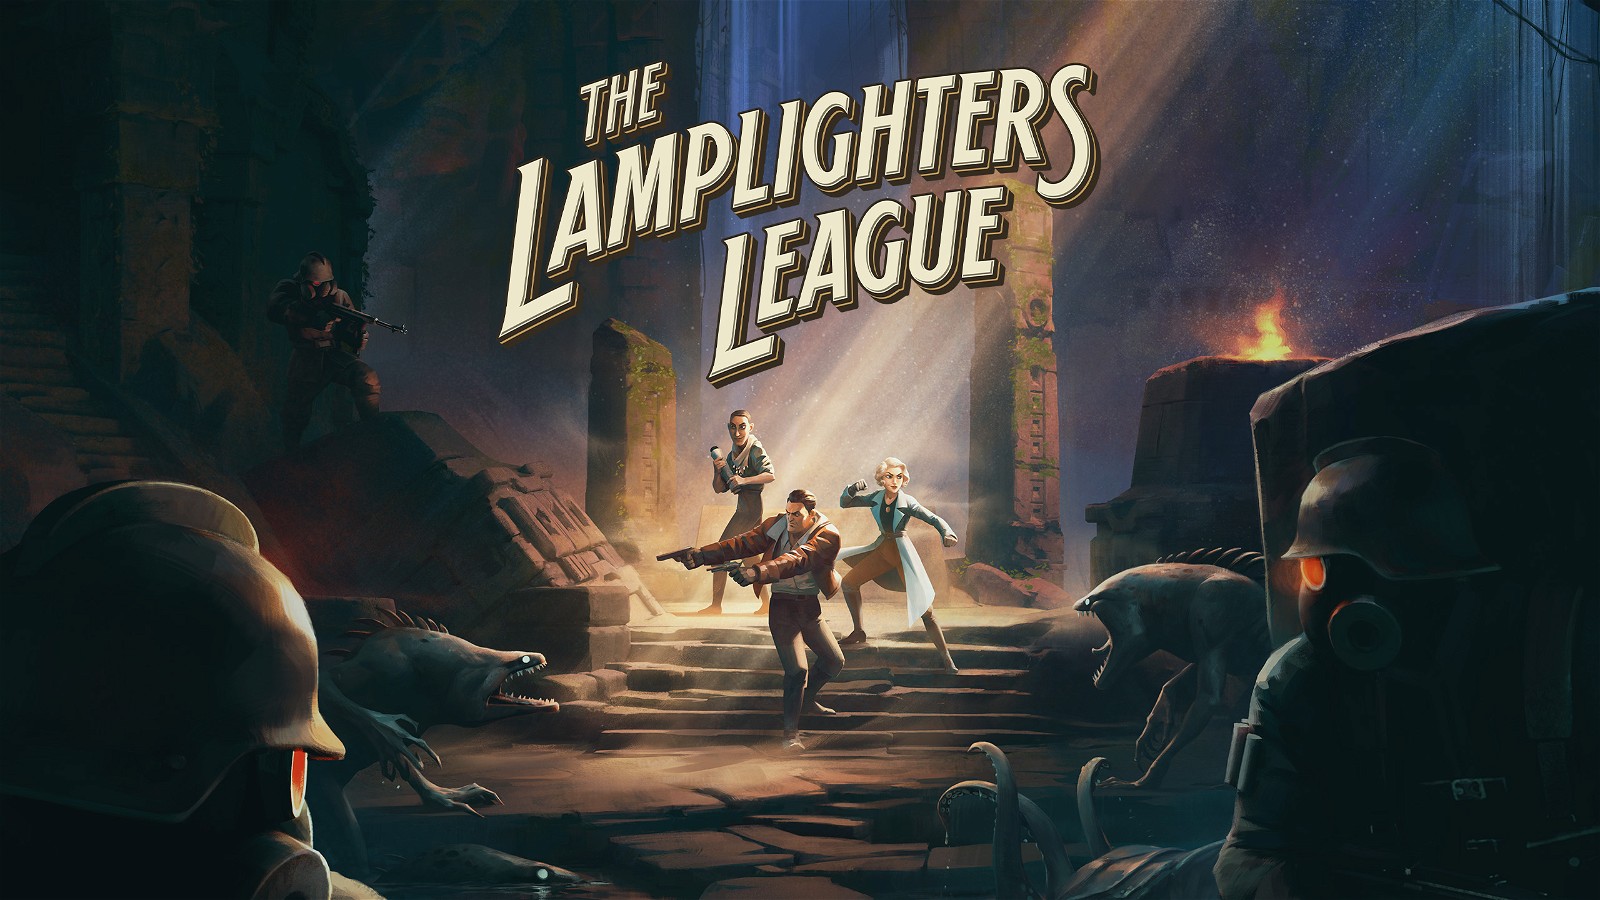 The Lamplighters League is coming out on the 3rd of October